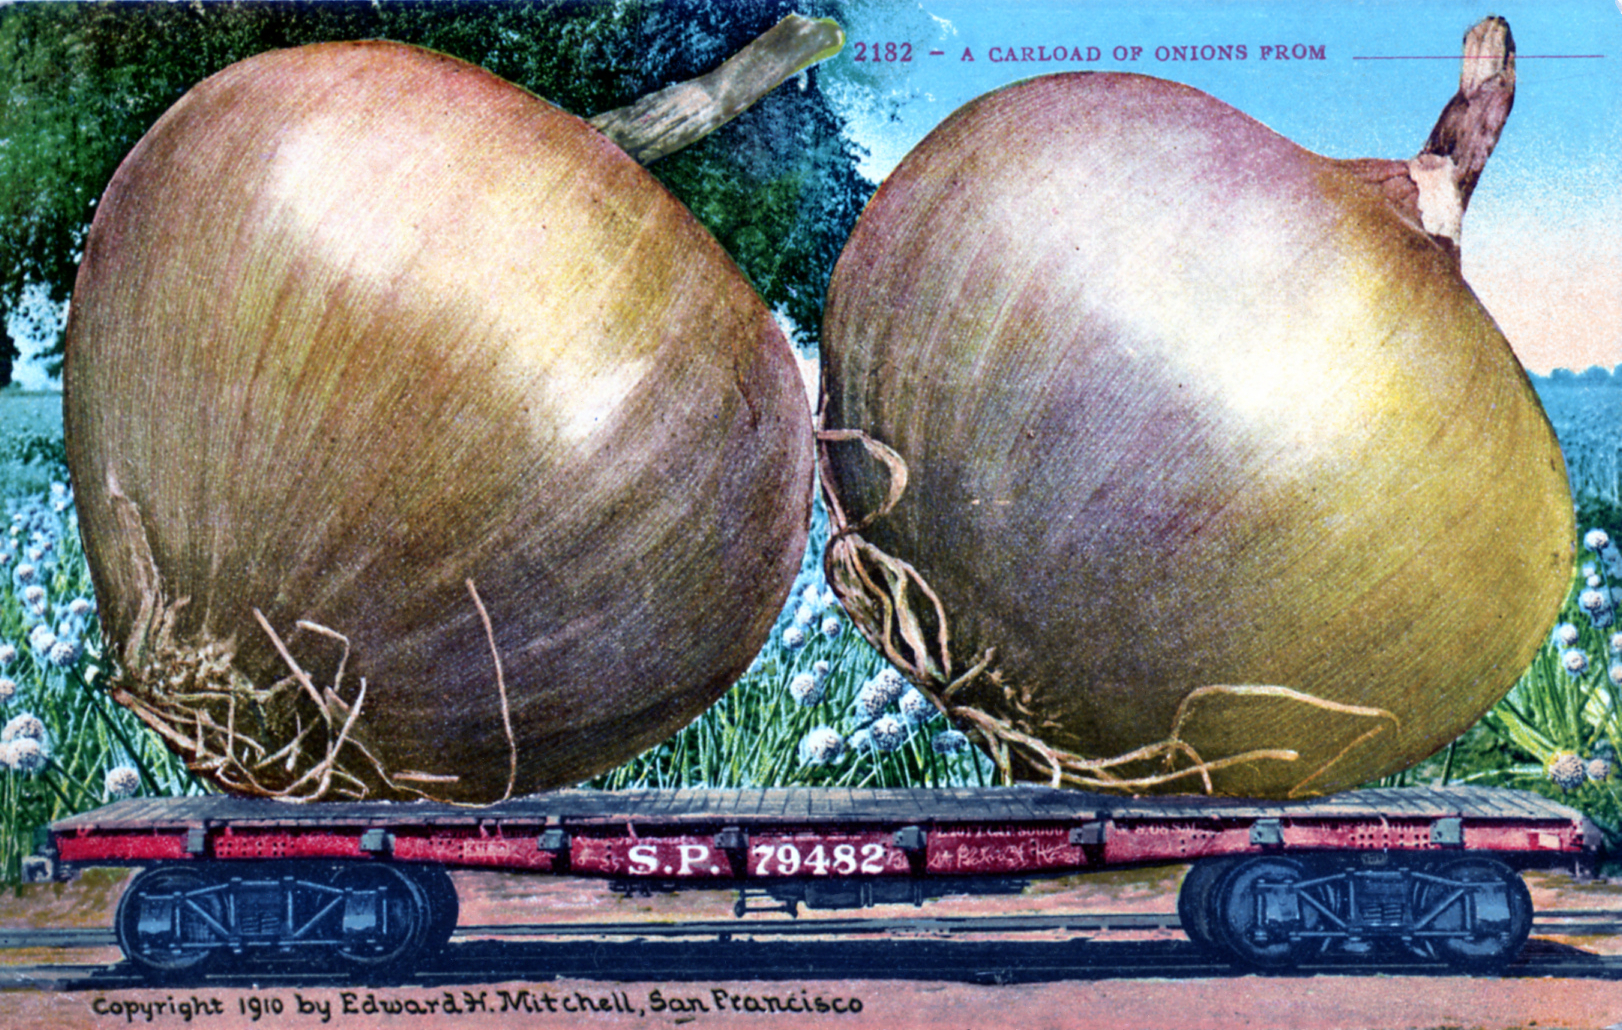 Carload of Onions from ______ Southern Pacific c. 1910 Edward H. Mitchell, San Francisco